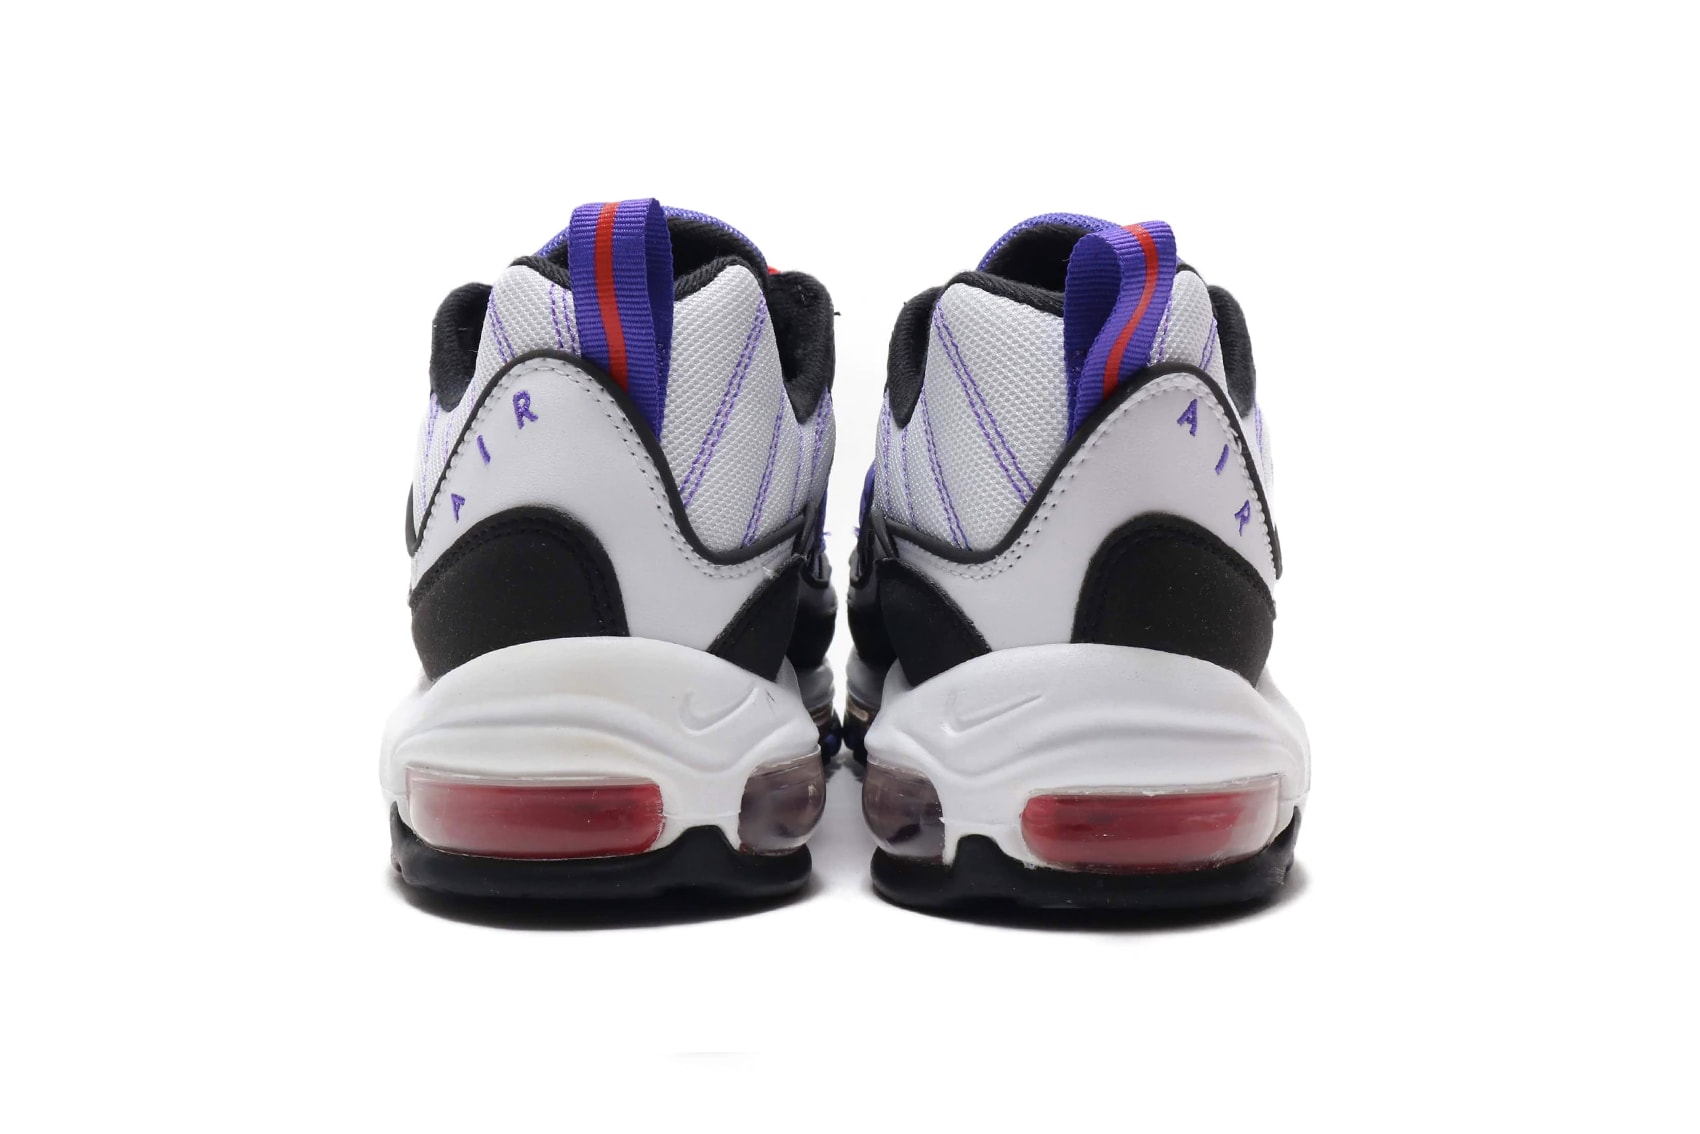 Nike Air Max 98 White Psychic Purple footwear sneakers raptors toronto nba air unit sole cushioning technology mesh leather round laces bubbles translucent